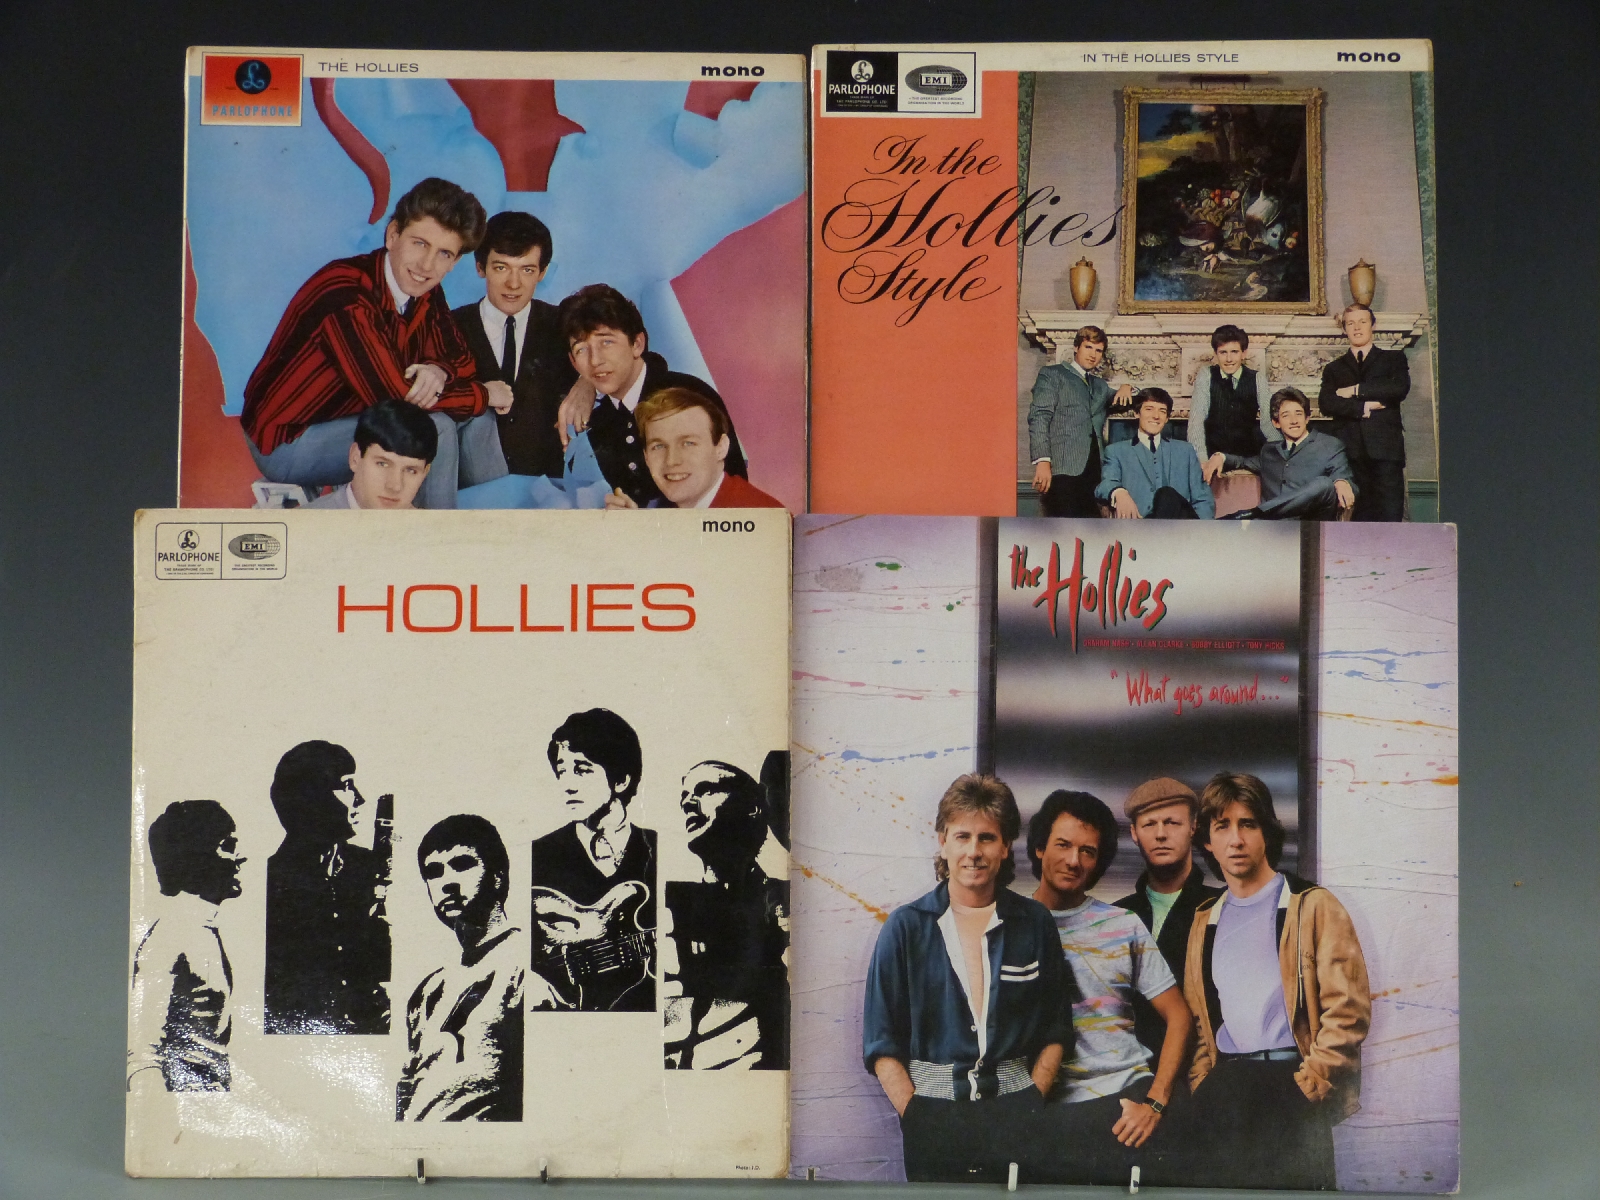 The Hollies - 7 LPs including Stay With, Style, Hollies, Certain and Butterfly.